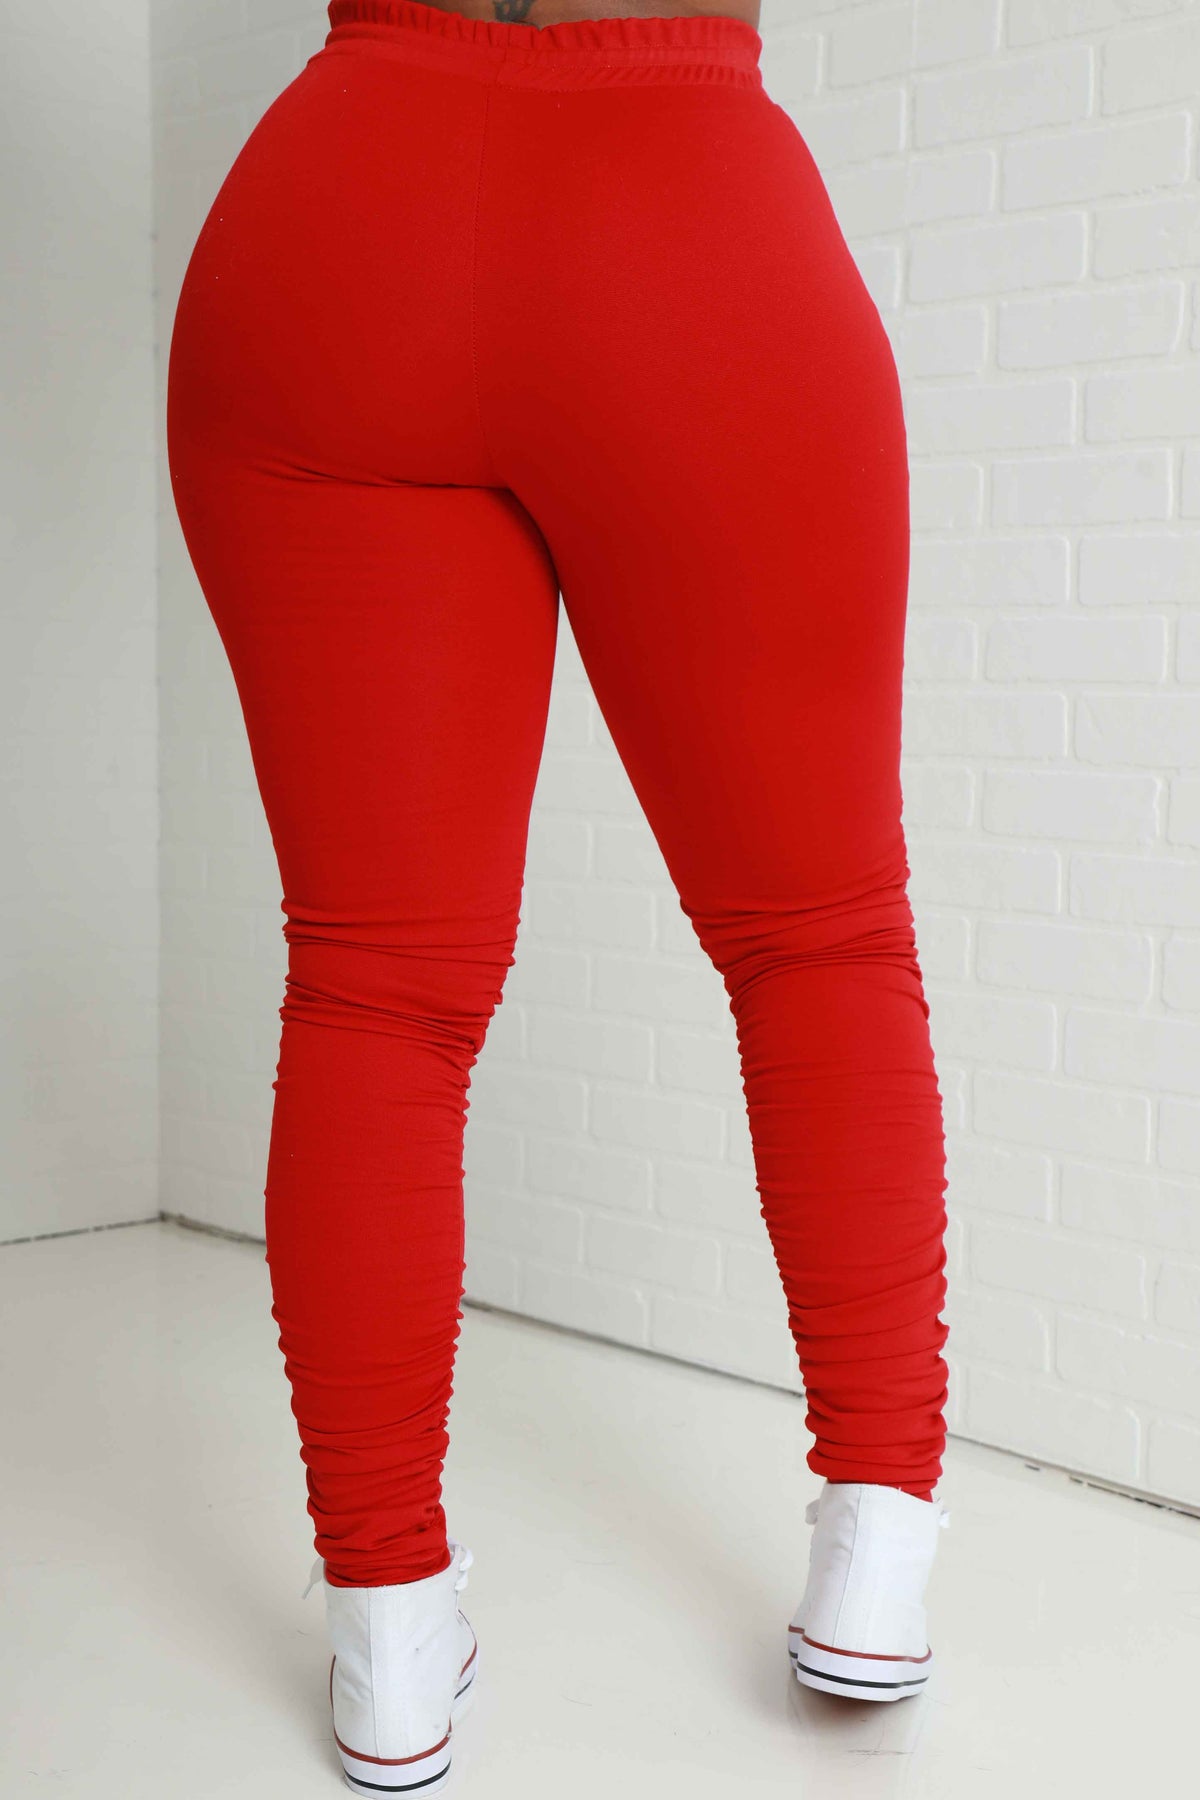 Now Ruched Leggings - Swank A Posh